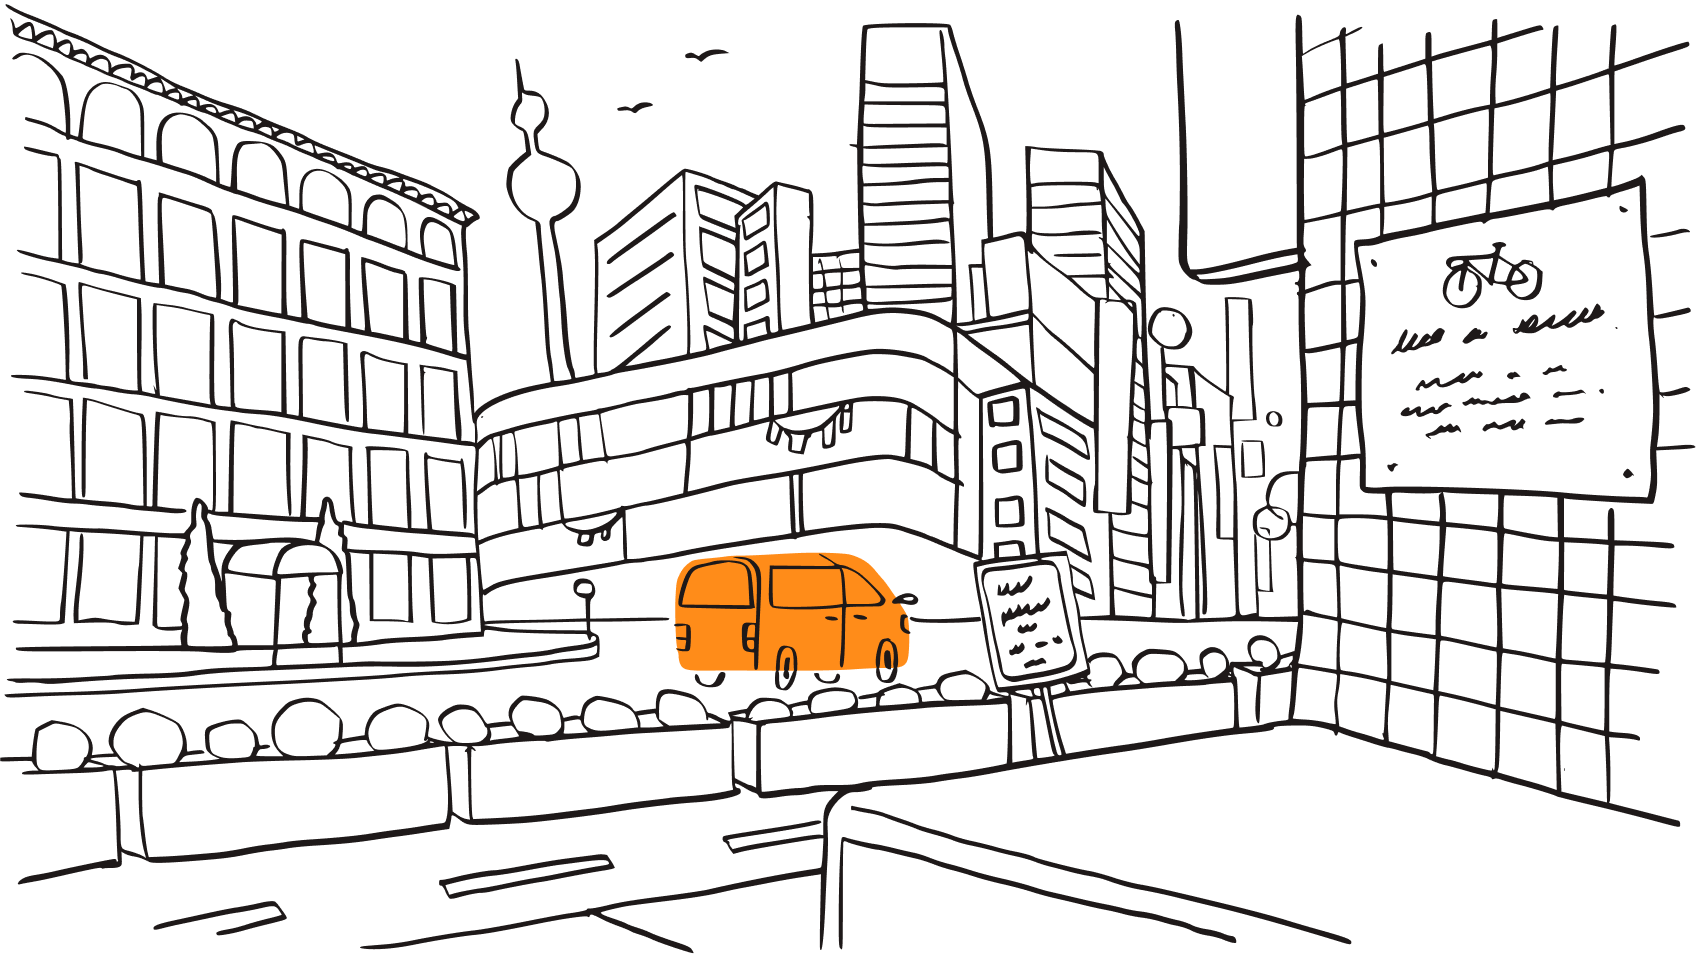 An illustration of a city, representing the threat cyber attacks pose and the reality that they can come from anywhere.